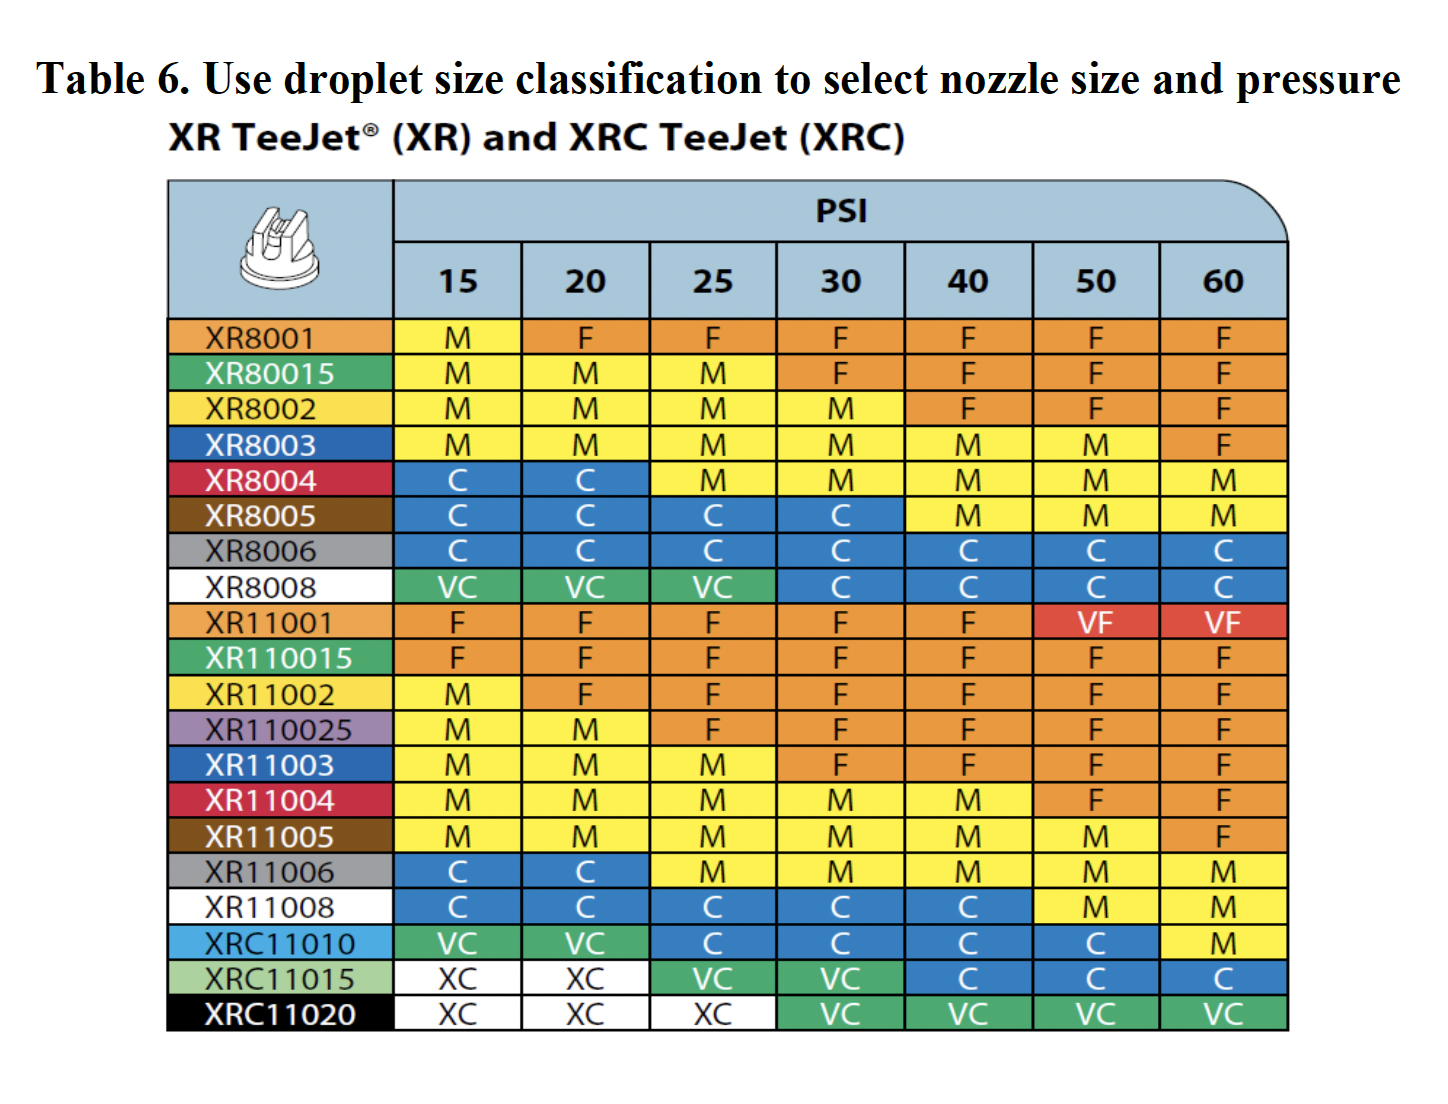 Table of droplet size classification to select nozzle size and pressure